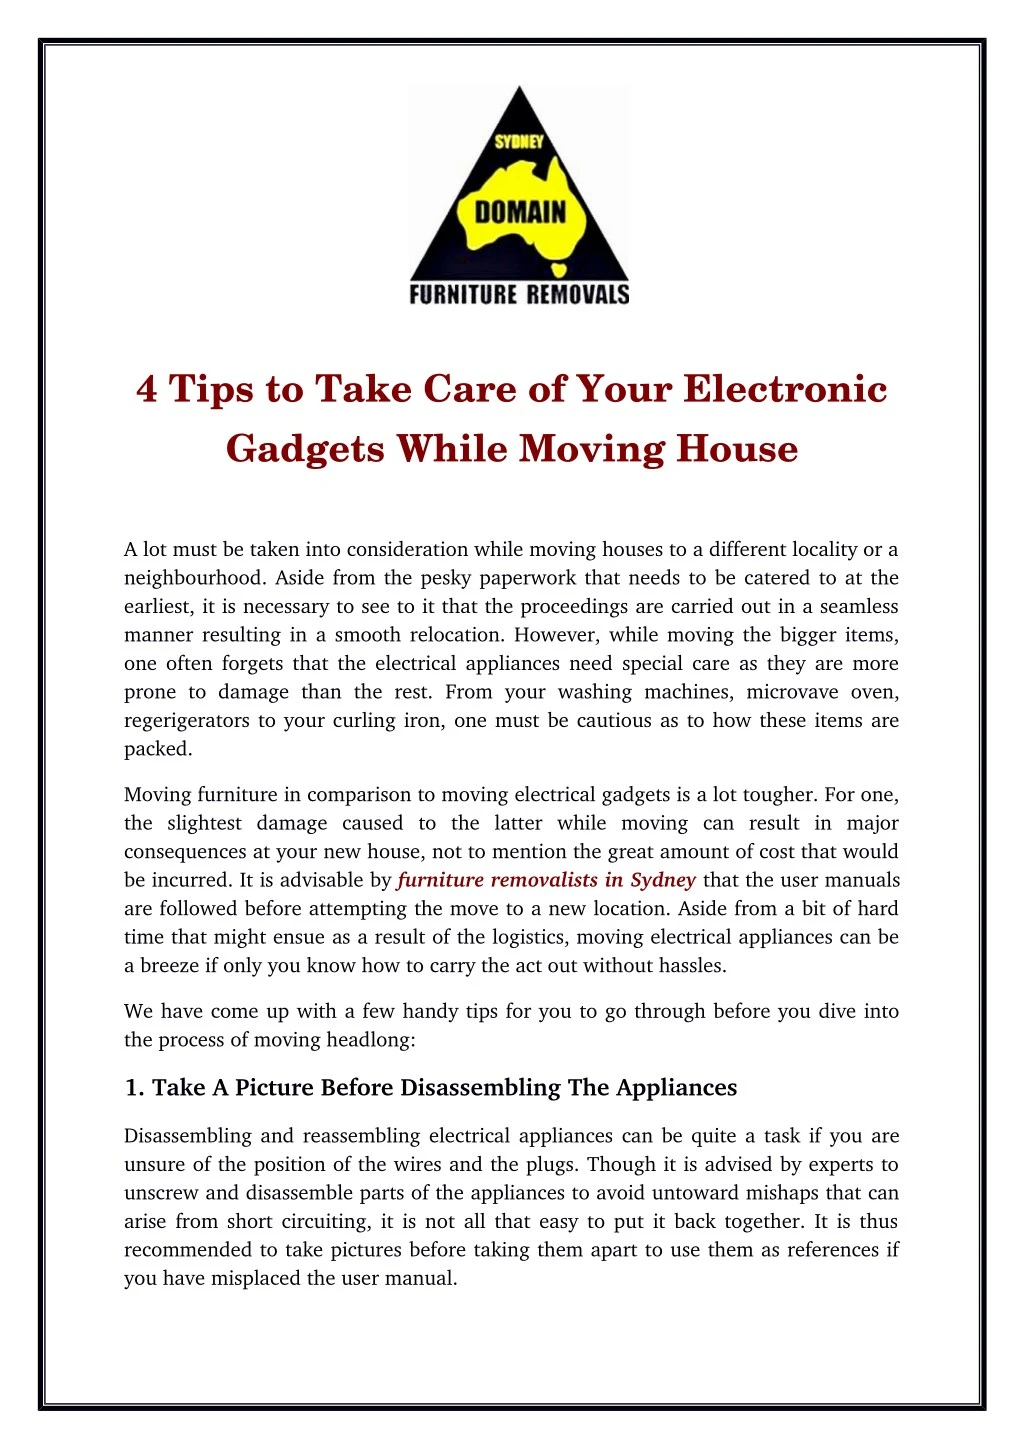 4 tips to take care of your electronic gadgets